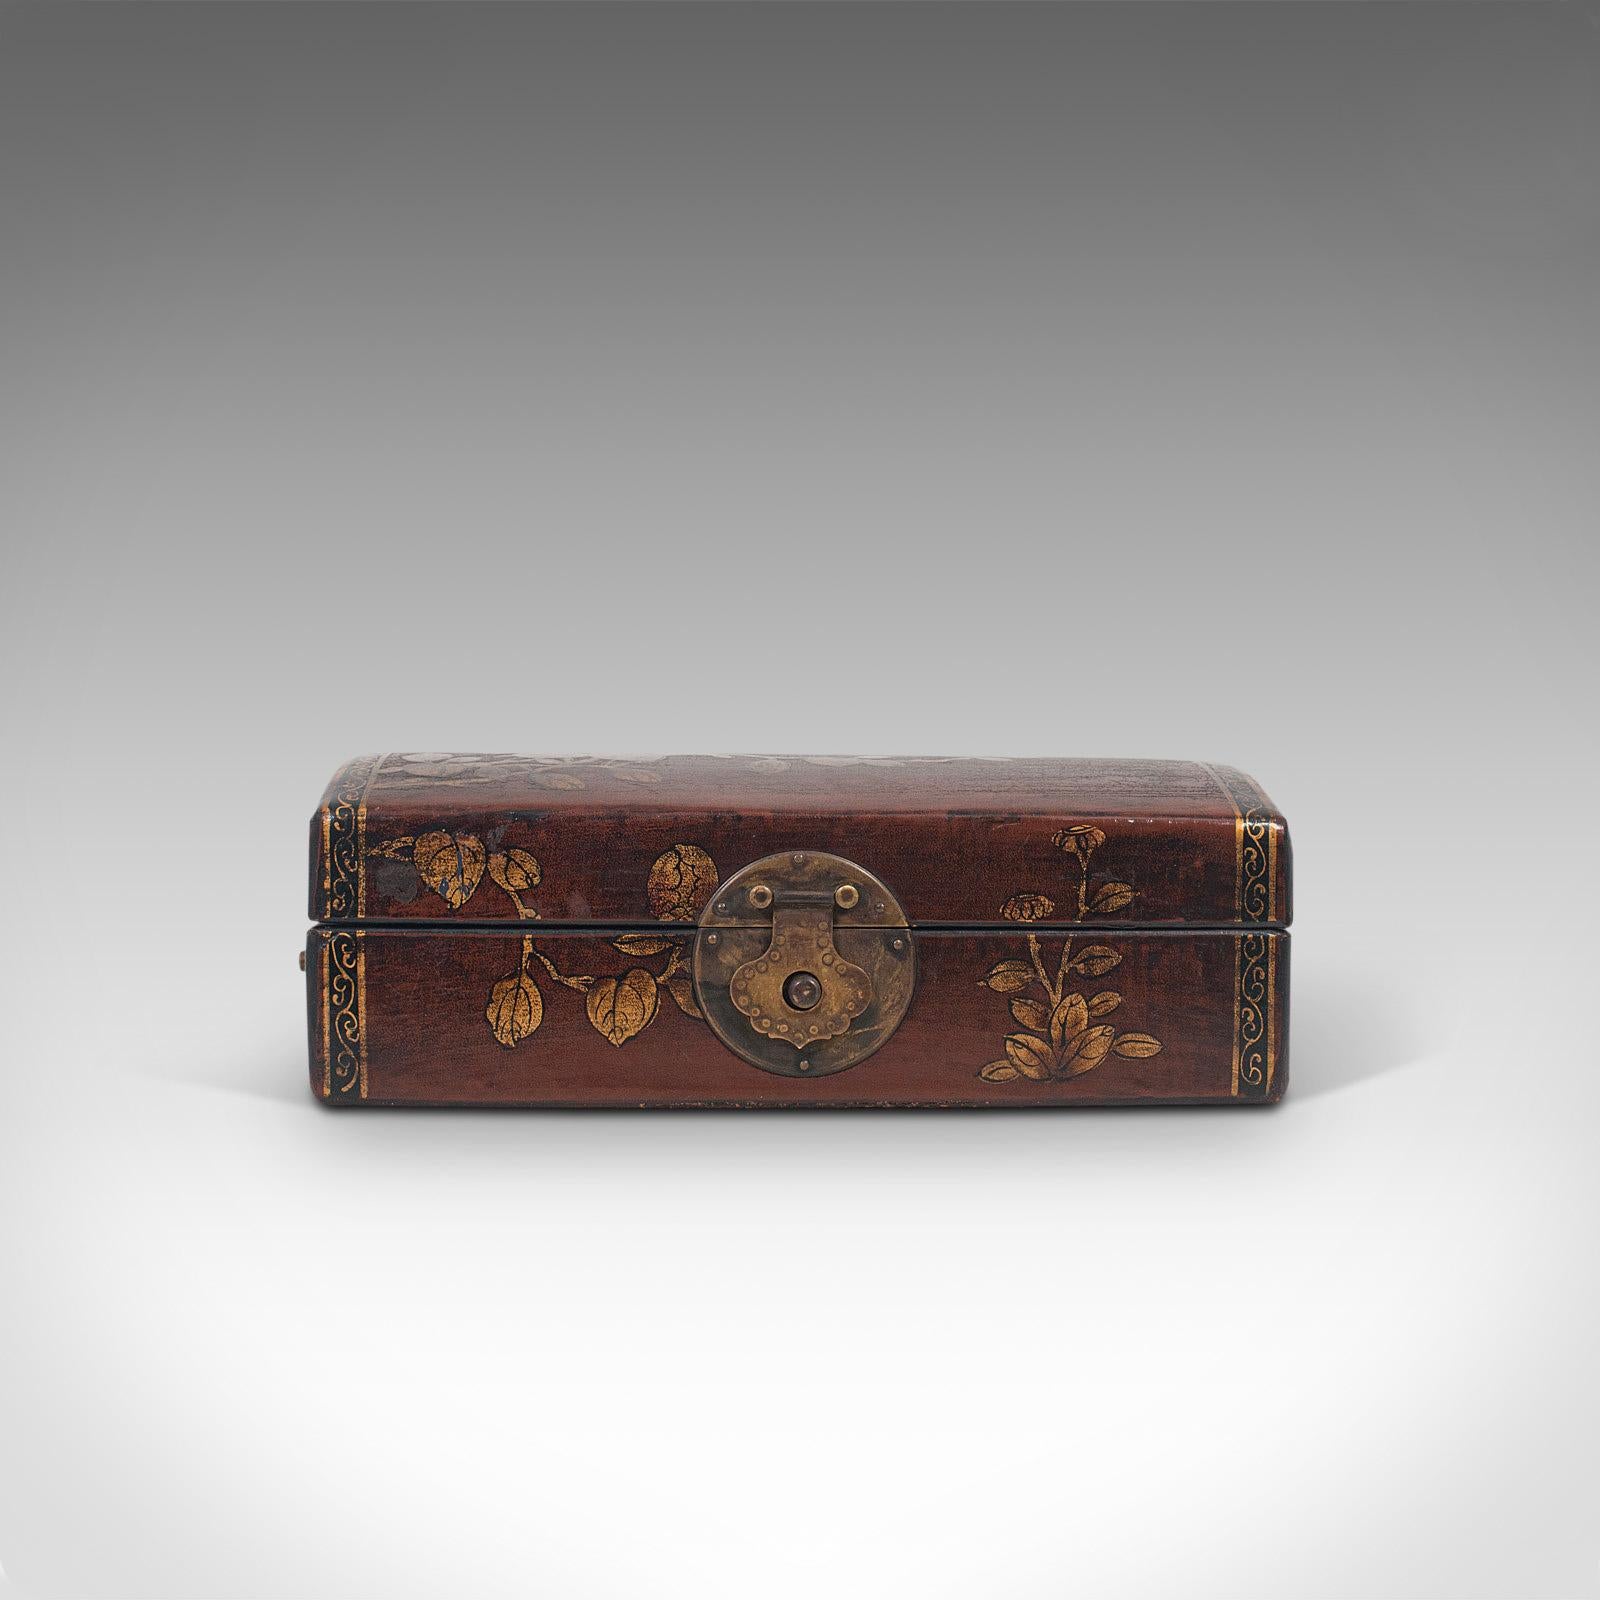 This is an antique jewelry box. A Japanese, leather bound desk caddy, dating to the Meiji period in the late 19th century, circa 1900.

Intriguing finish and dark tones
Displays a desirable aged patina, commensurate with age
Leather bound with